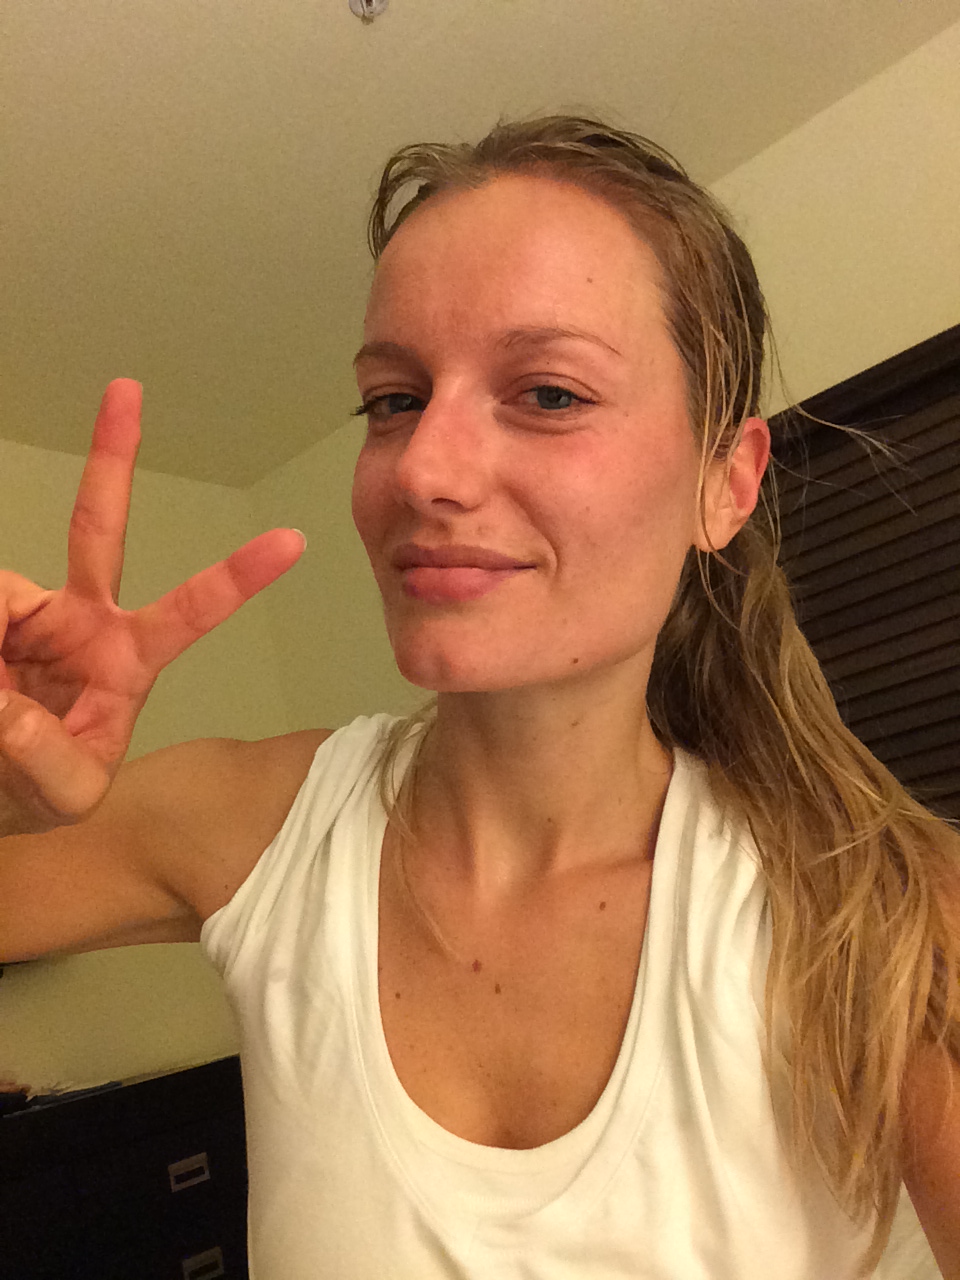 "...post-workout selfie!! The same as on set lol!!"